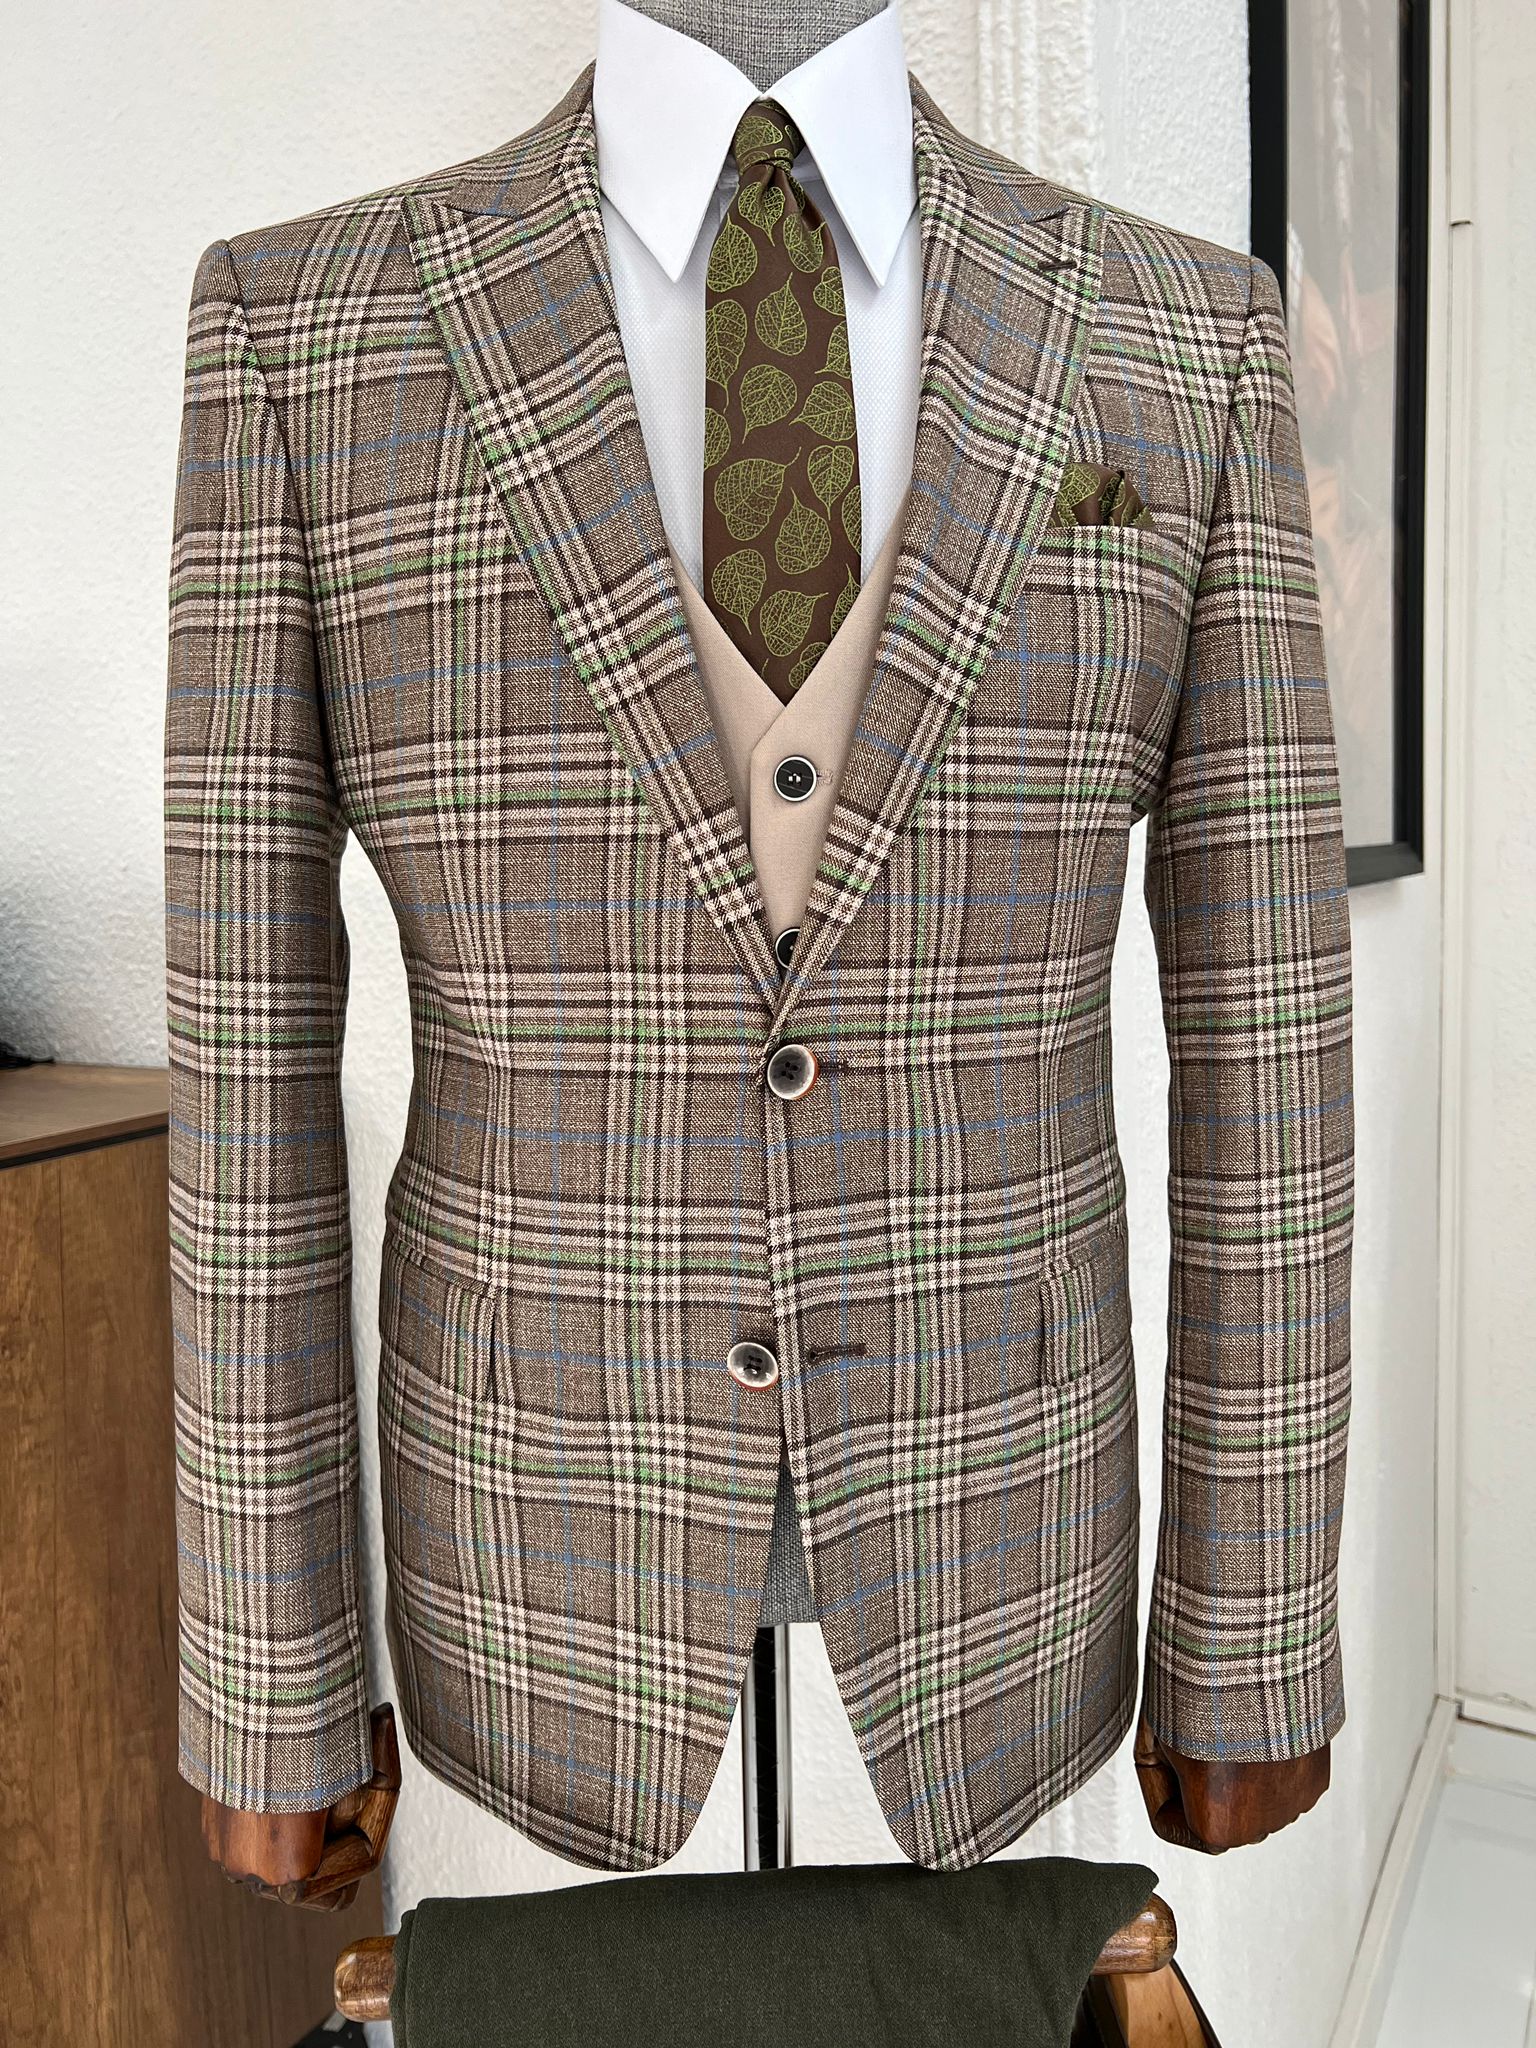 Louis Slim Fit Pointed Collared Beige & Khaki Combination Suit